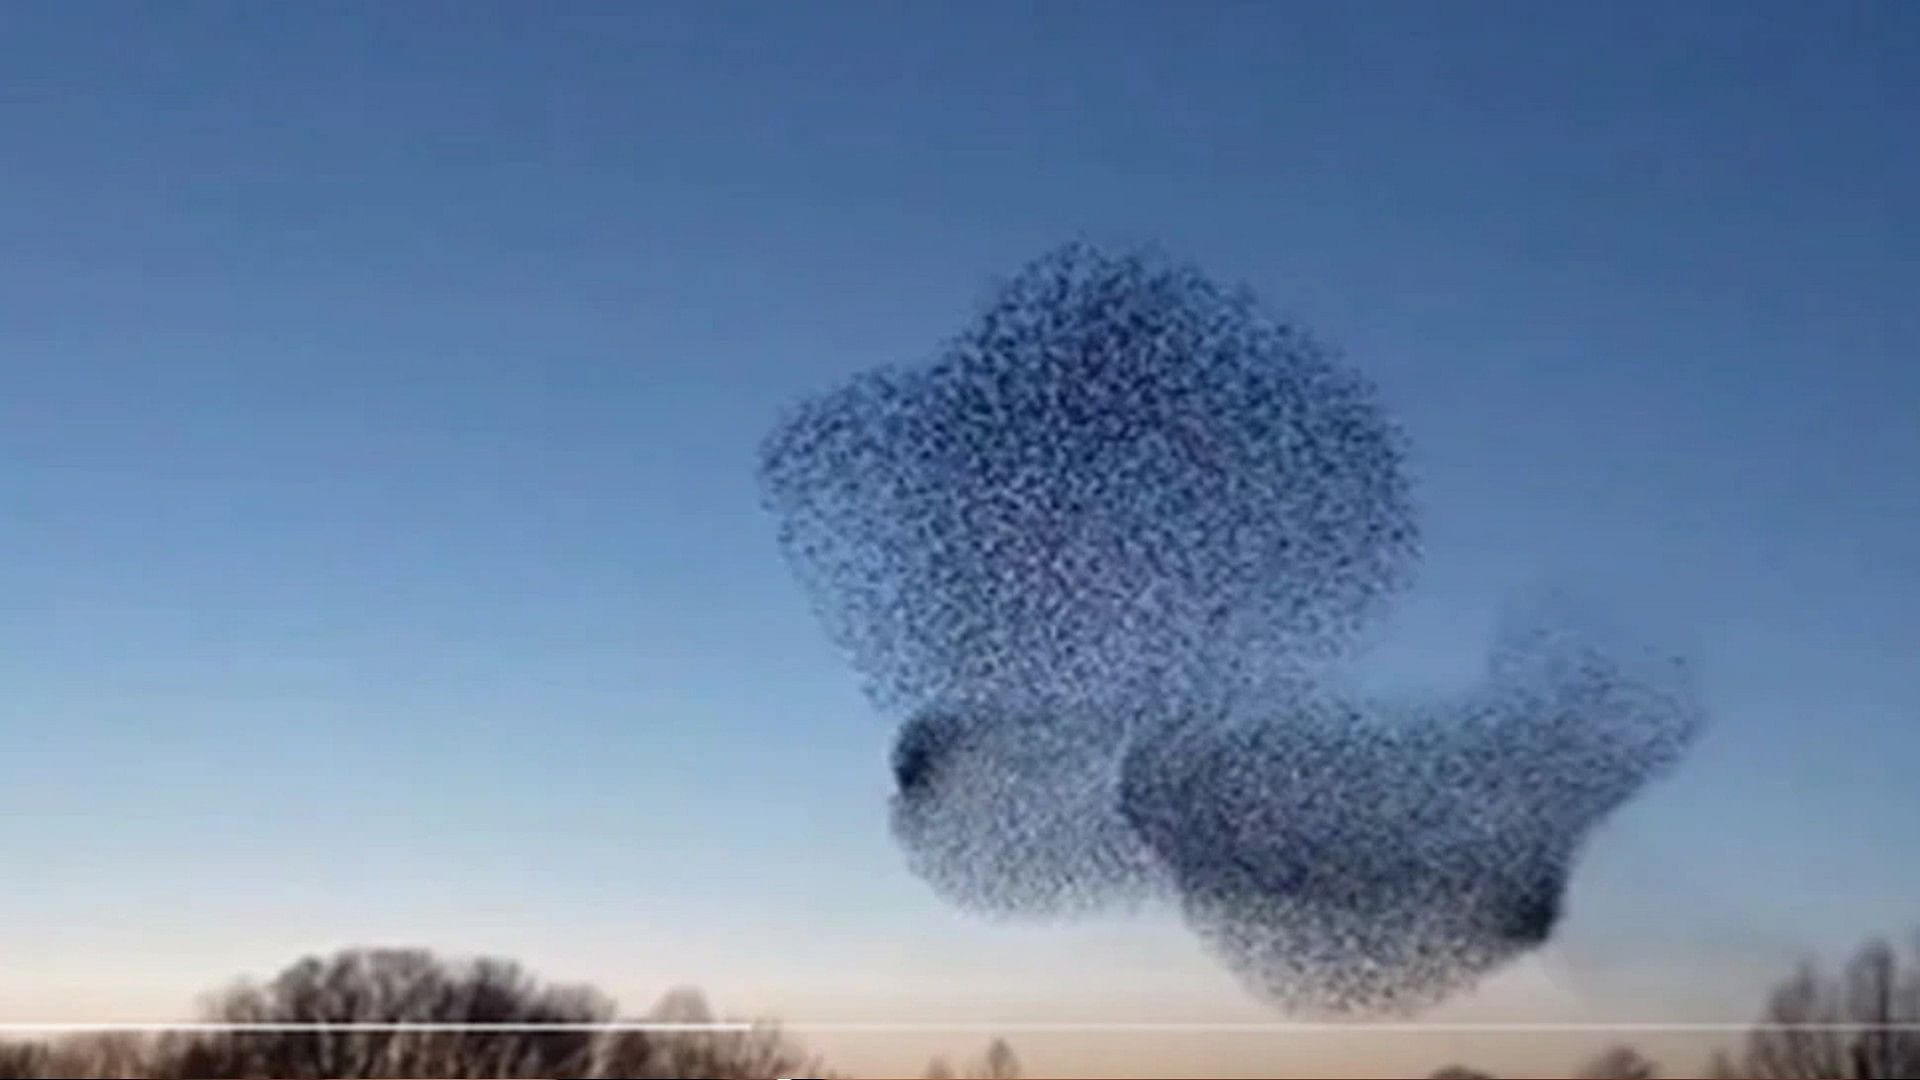 Birds made such a beautiful picture in the sky video is going viral on social media